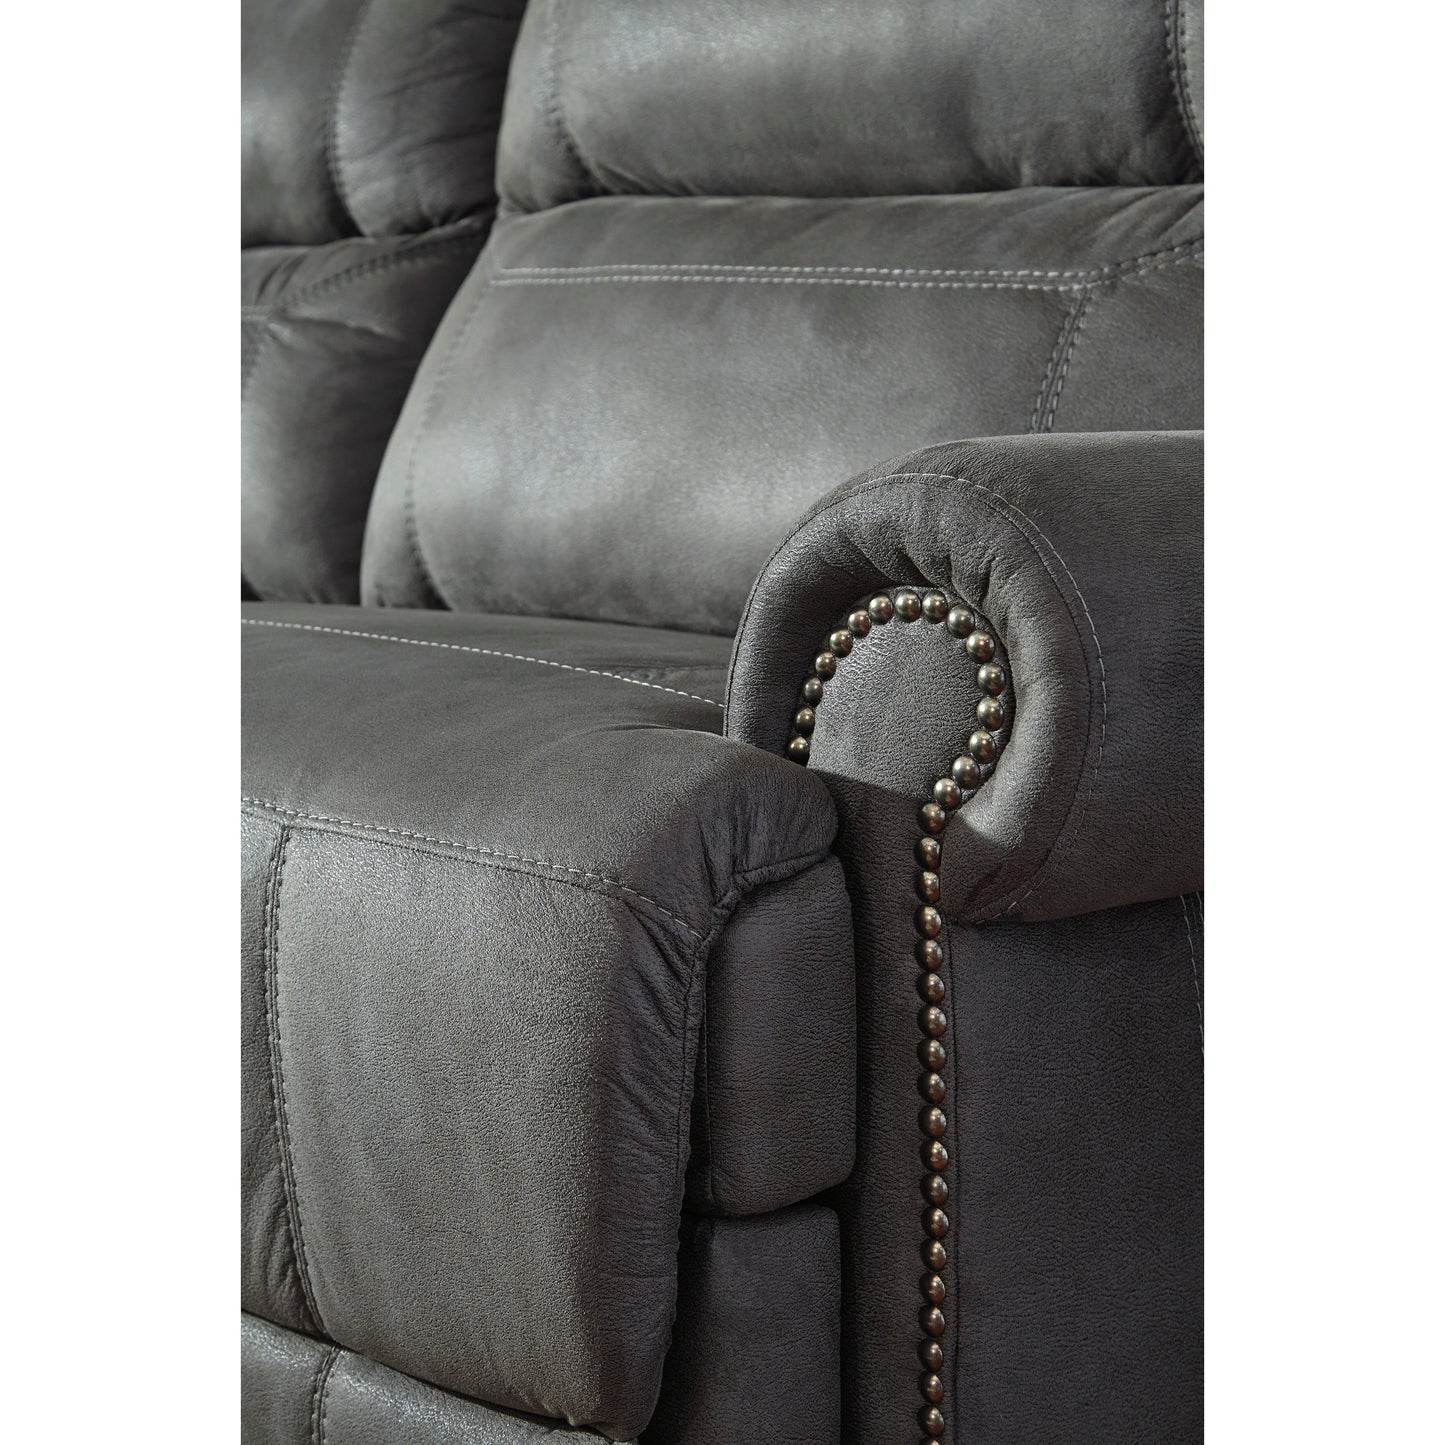 Signature Design by Ashley Austere Fabric Recliner with Wall Recline 3840152